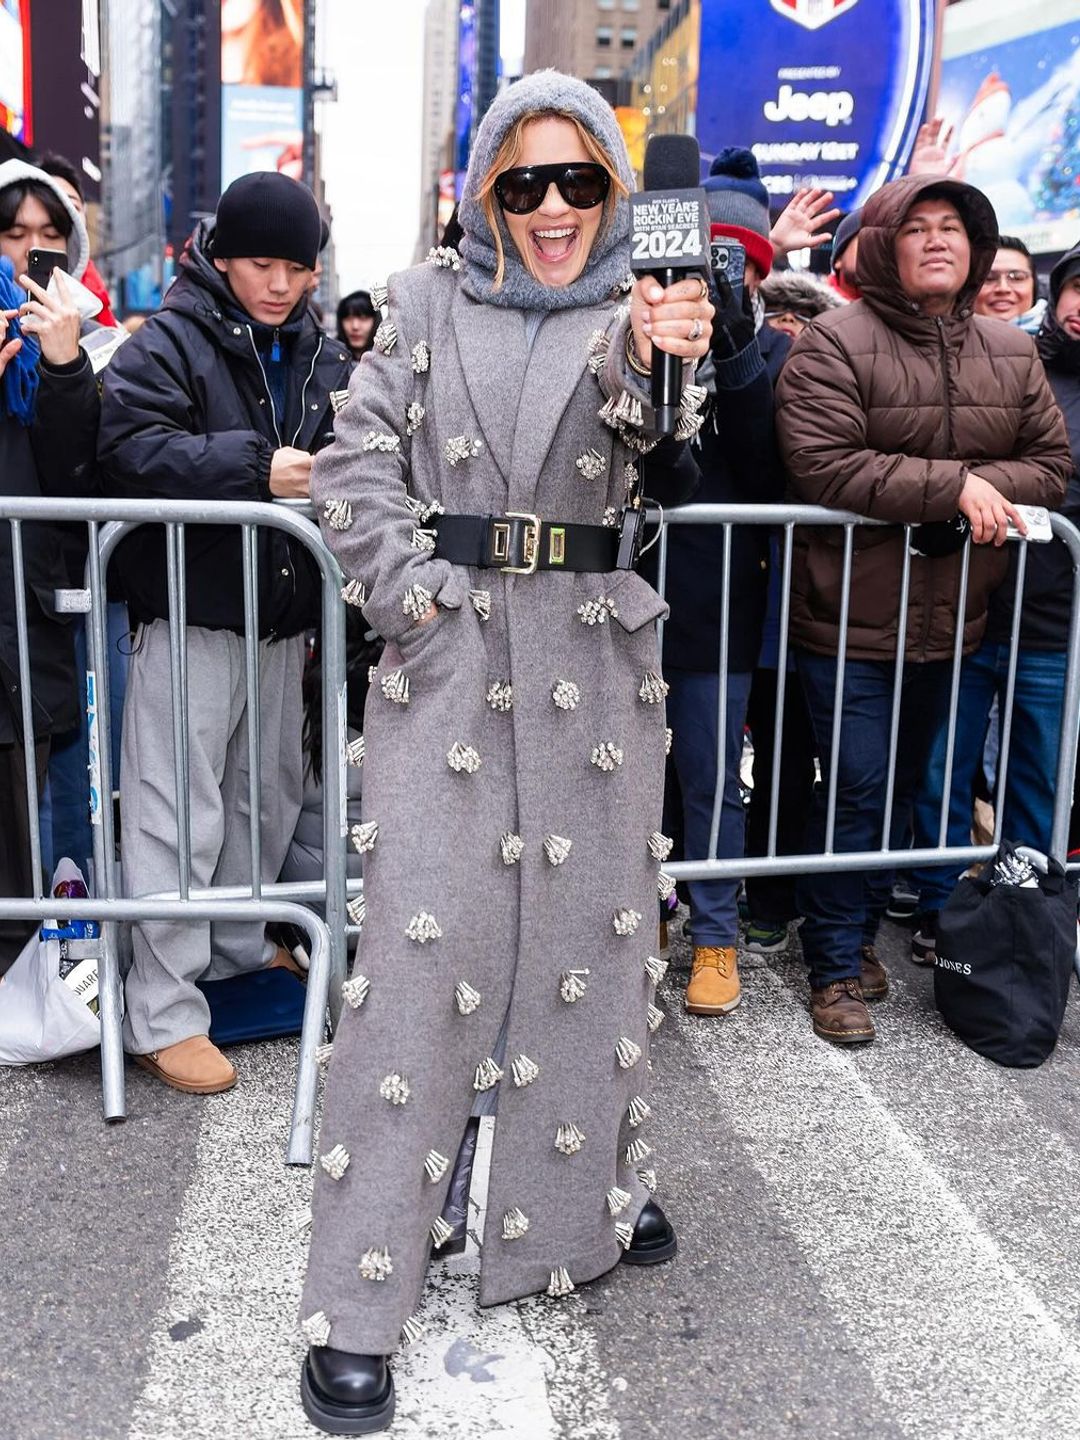 Rita Ora poses in a long grey coat in times square, NYC